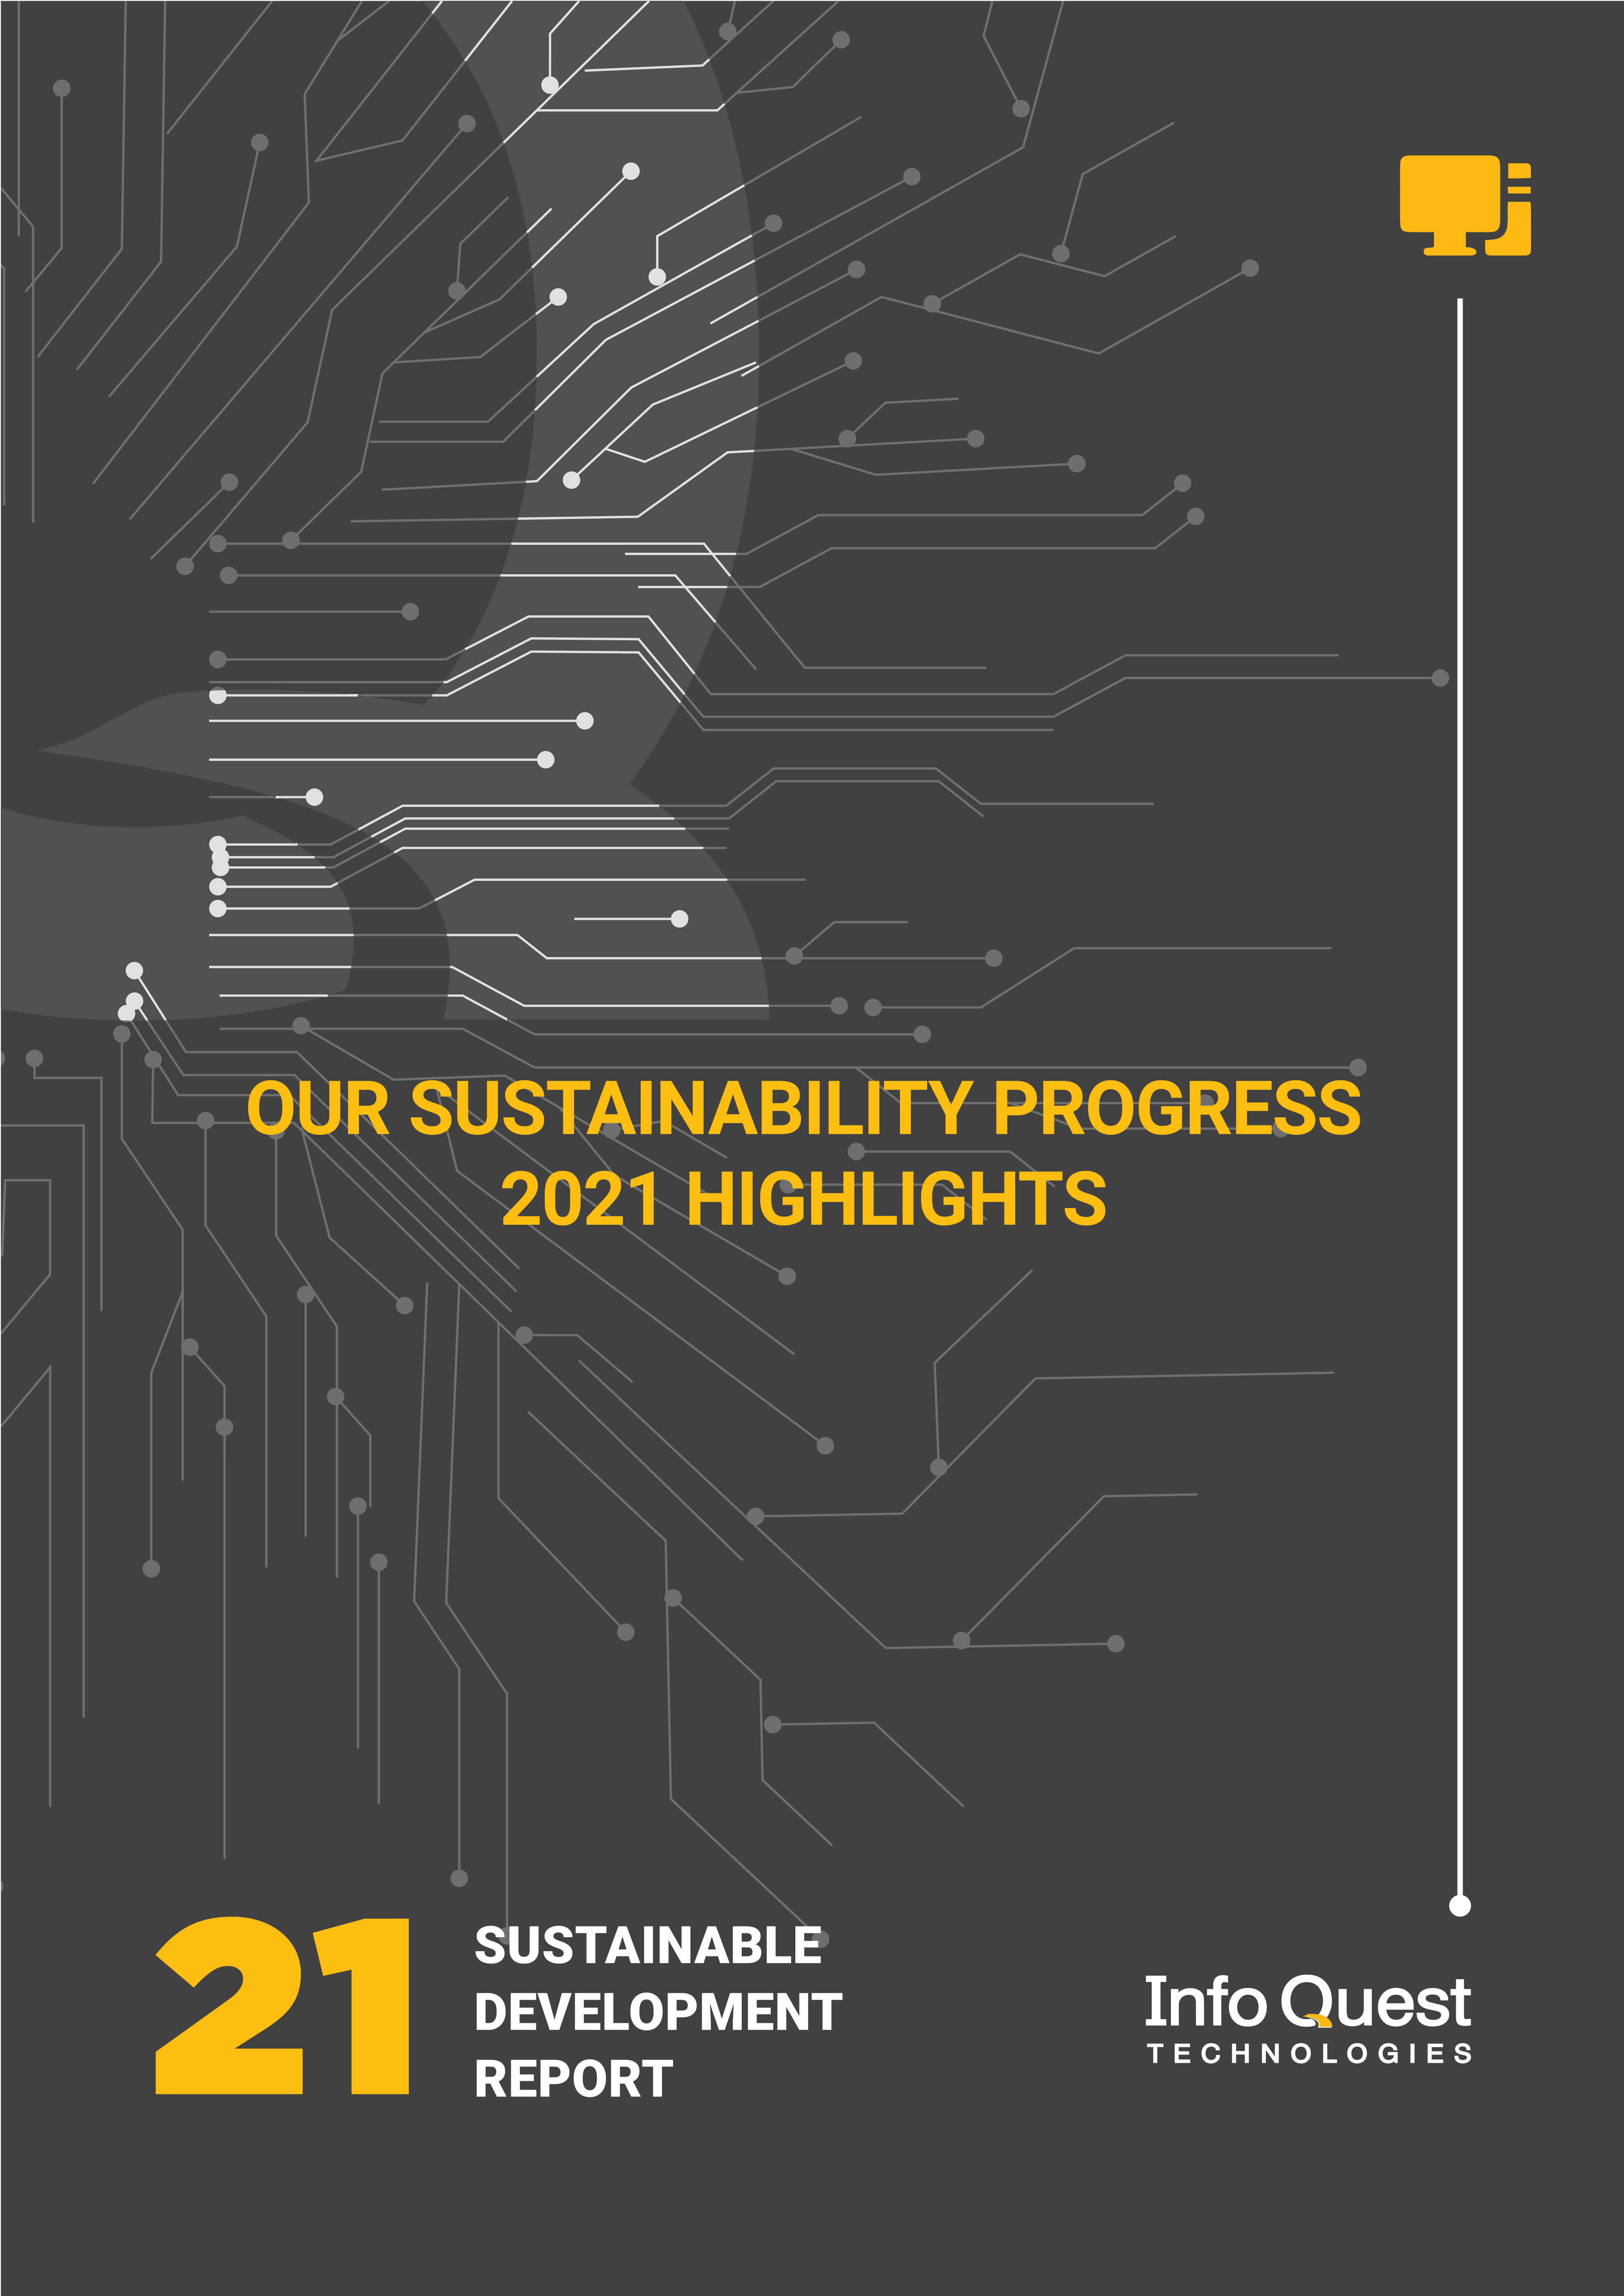 Highlights of our Sustainability Progress